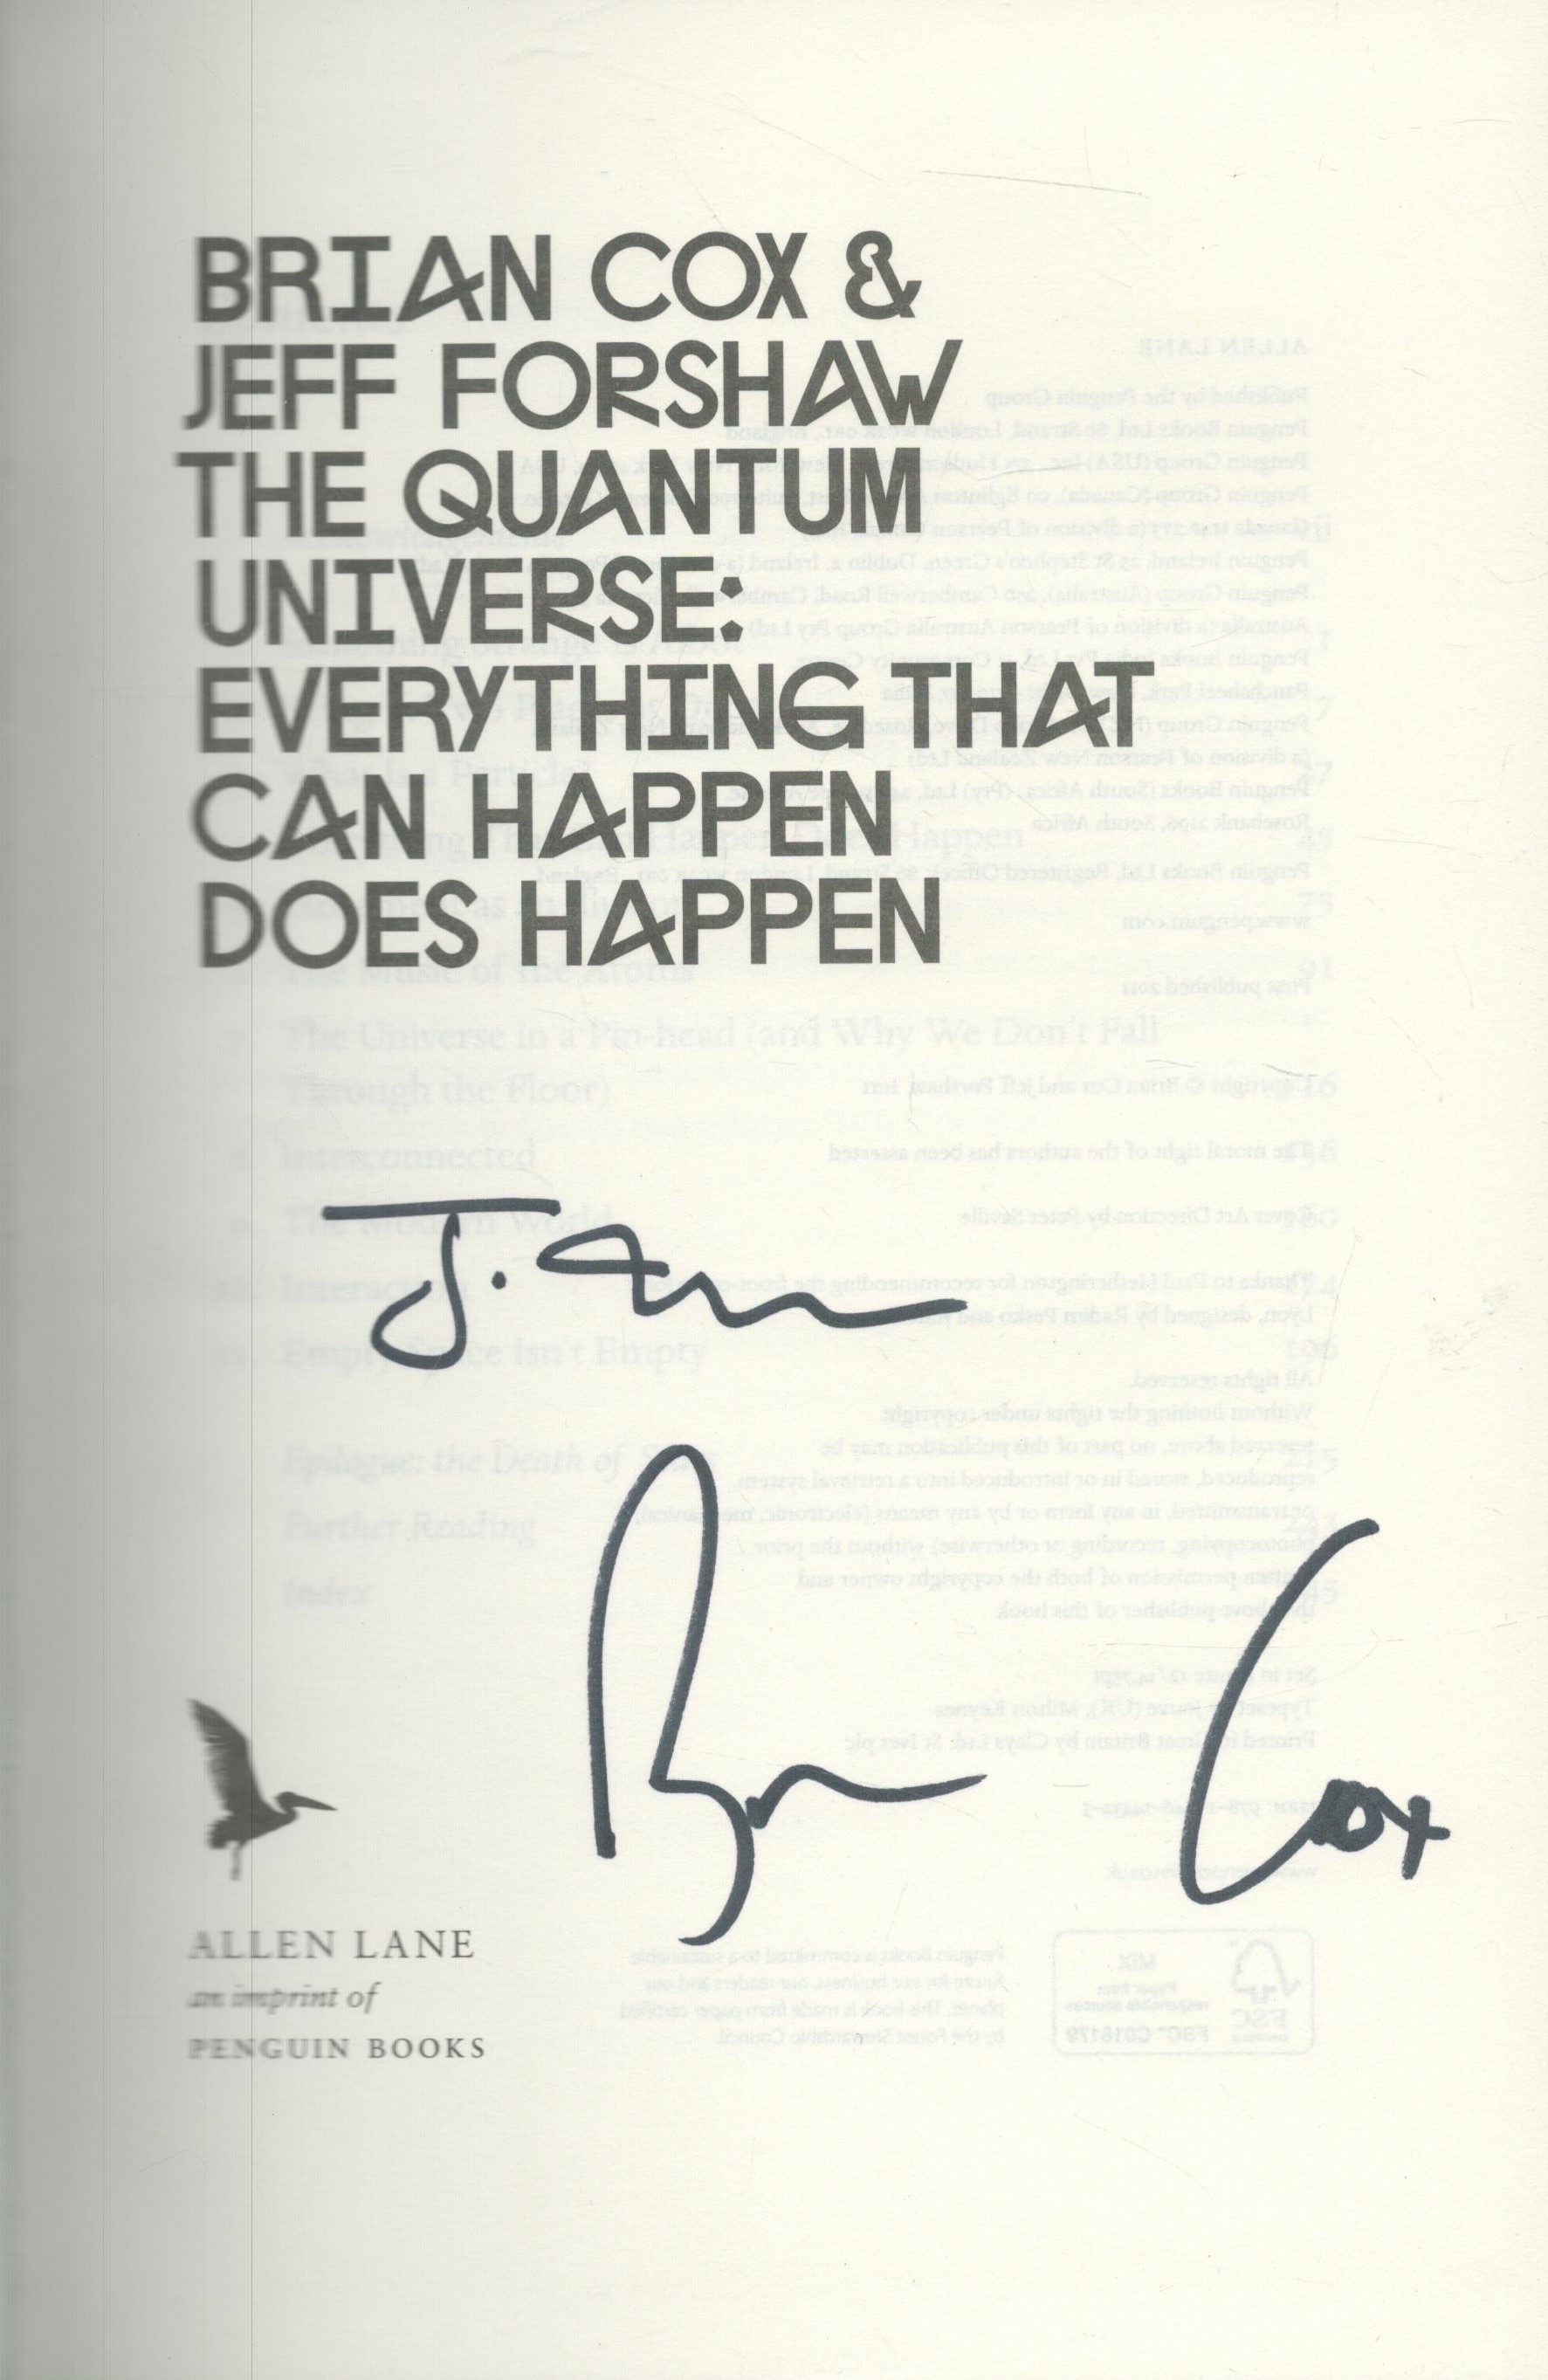 Brian Cox & Jeff Forshaw Signed Book - The Quantum Universe - Everything that can Happen does Happen - Image 2 of 3